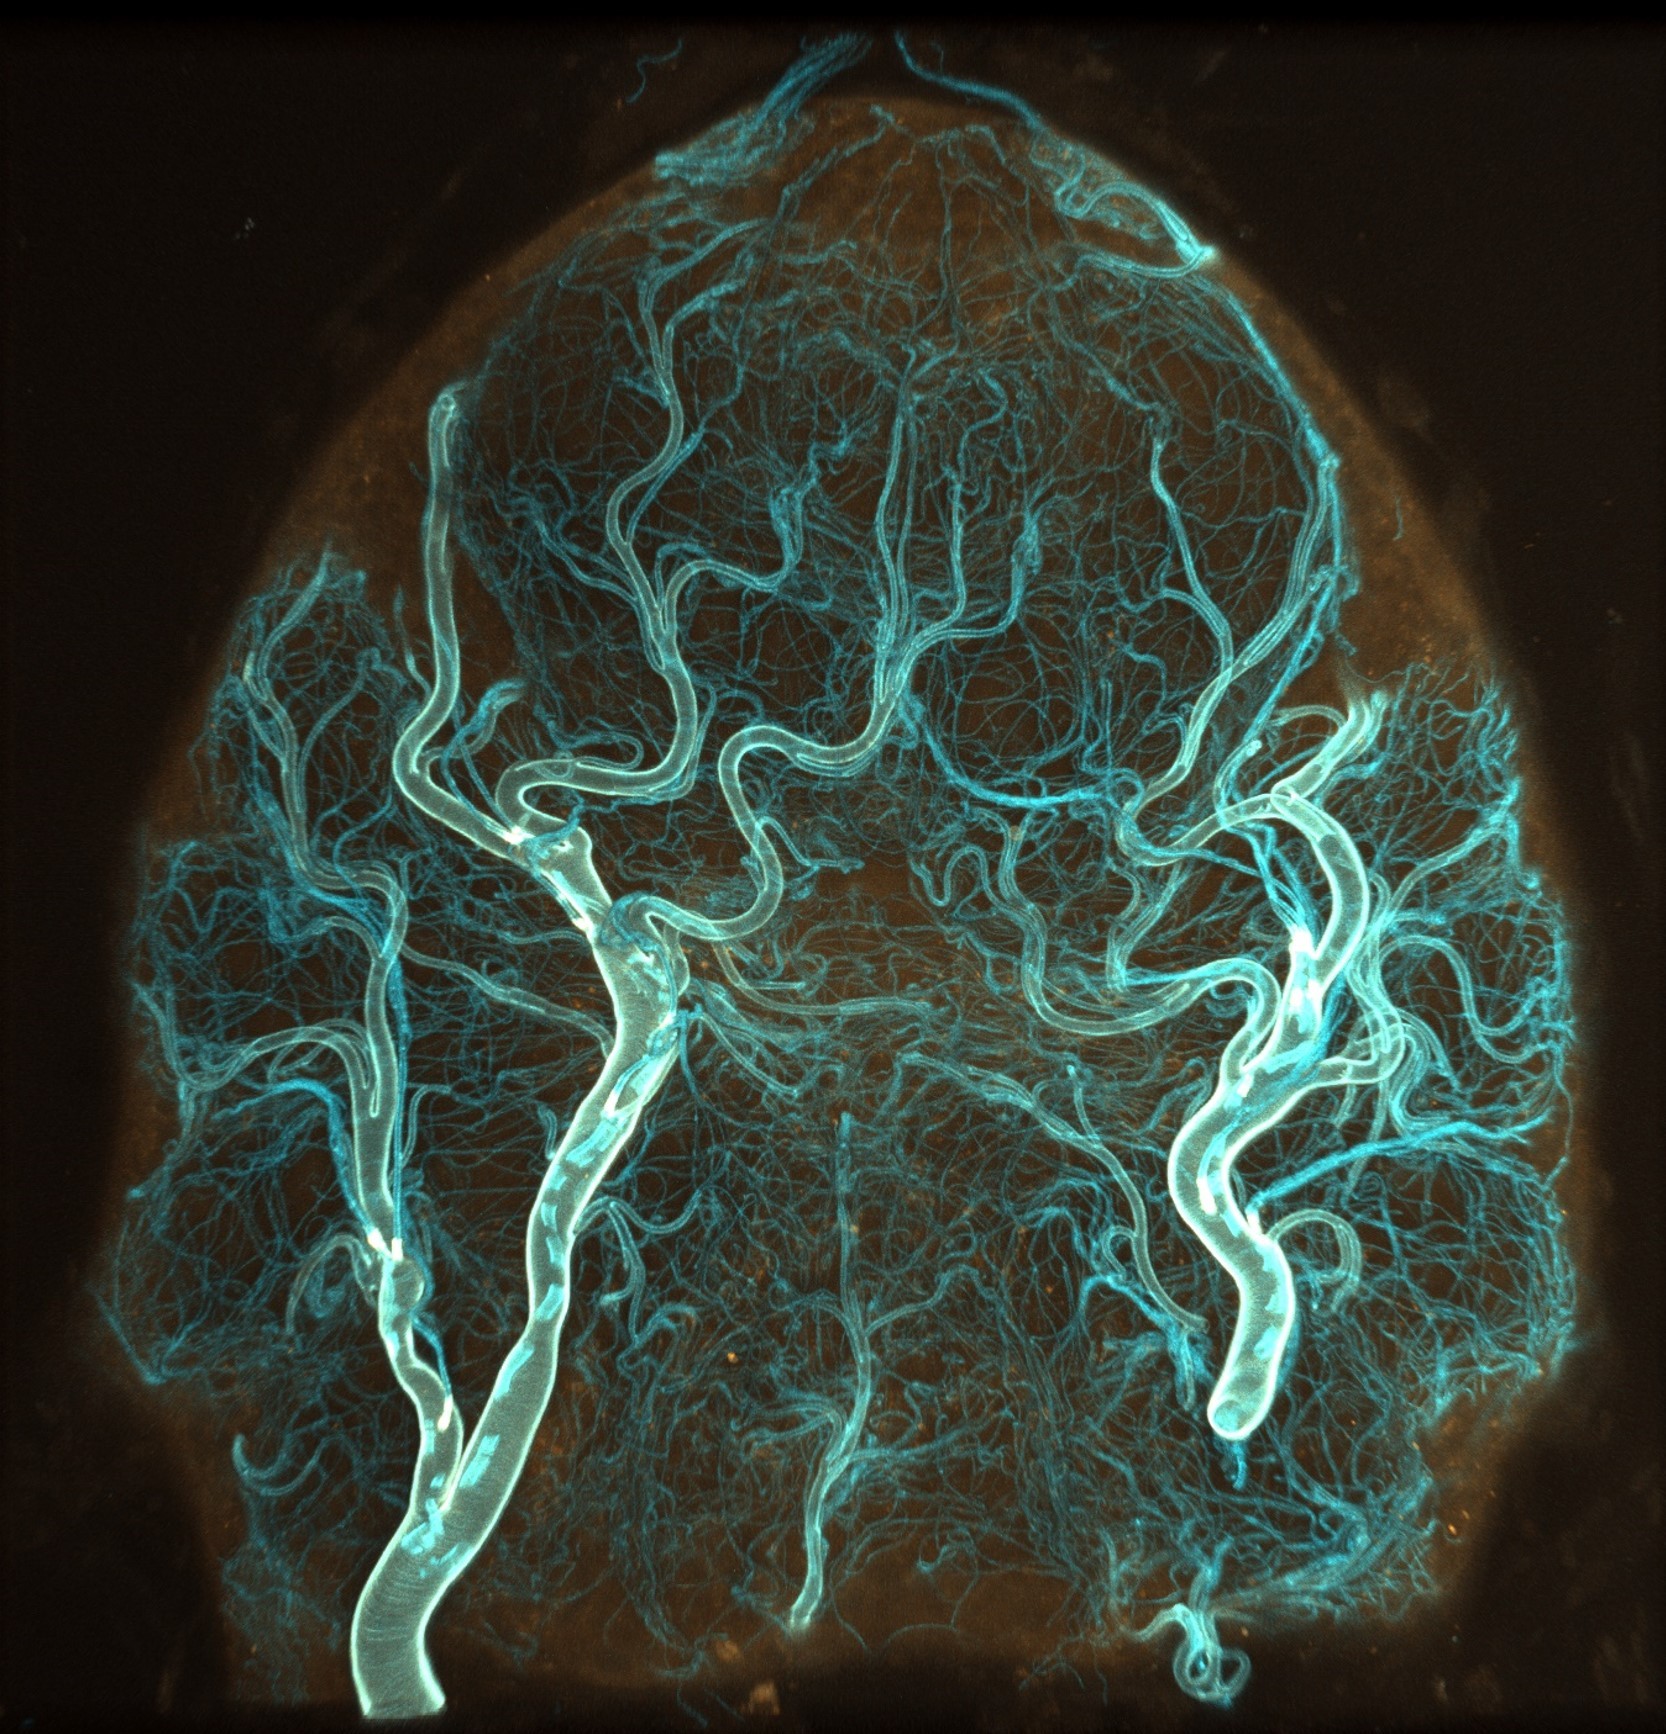 The "brain" of an adult male dog tick (Dermacentor variabilis). Trachael structure (blue) surrounding neuronal tissue (orange). Imaged on ZEISS LSM 900 confocal microscope . Credit: Carola Städele.